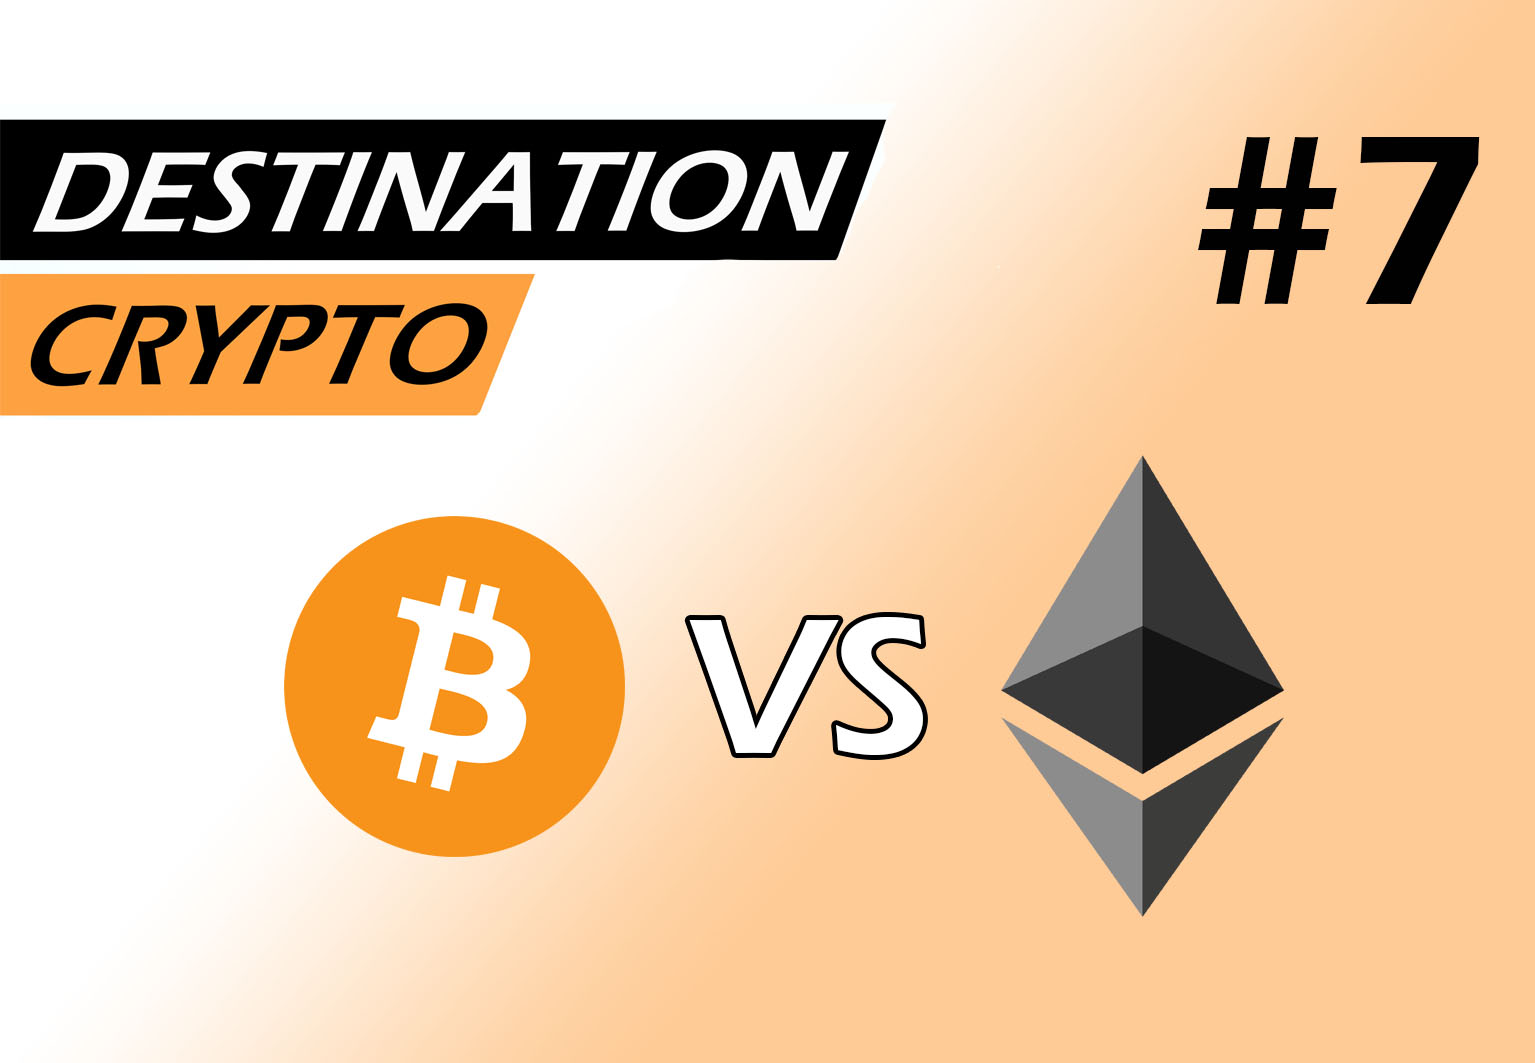 7# – Duel Bitcoin VS Ethereum (podcast)